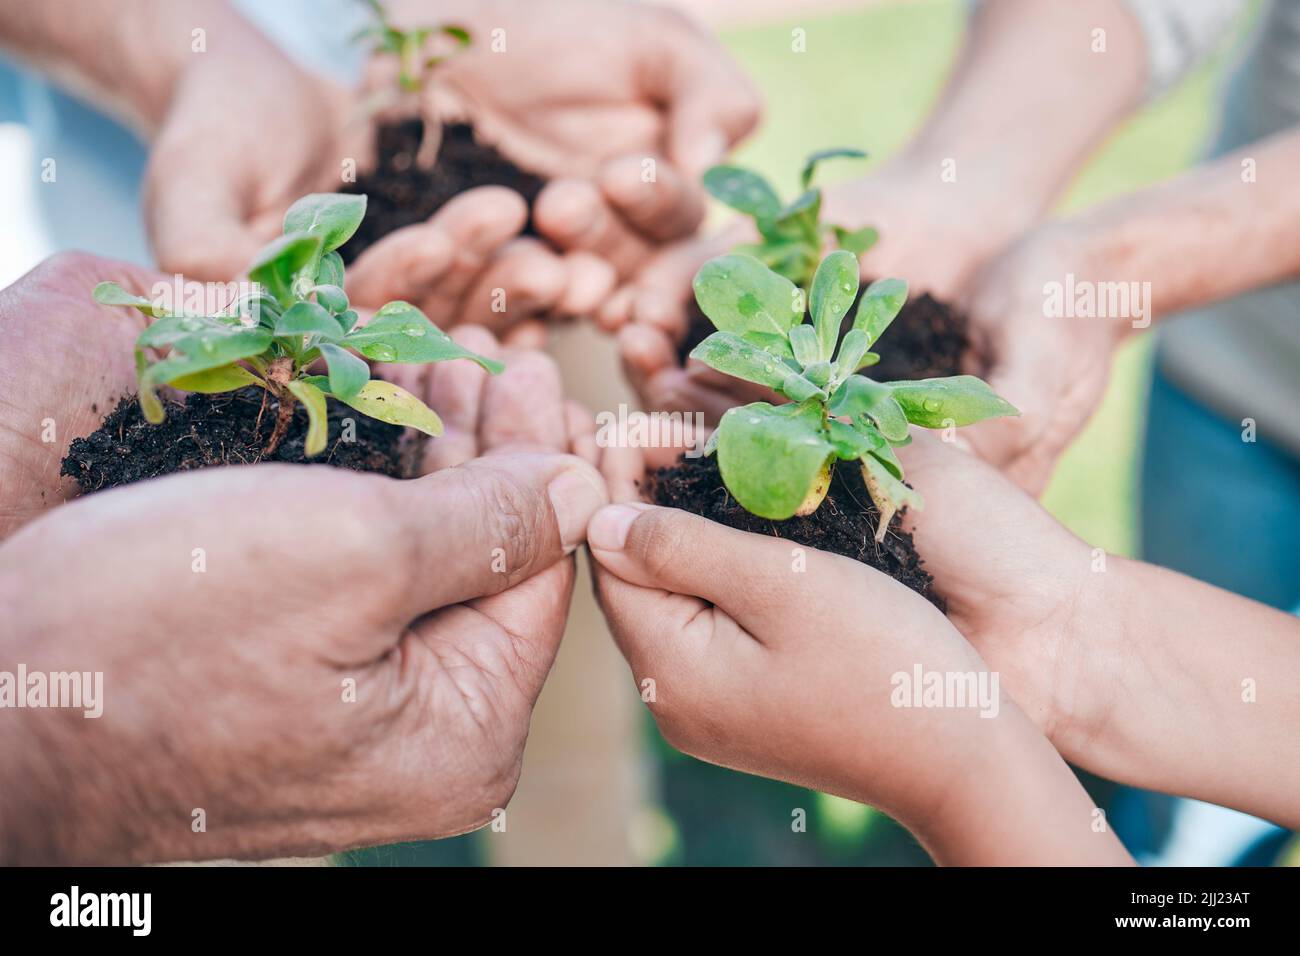 Earth warriors. a group of unrecognizable people holding plants growing out of soil. Stock Photo